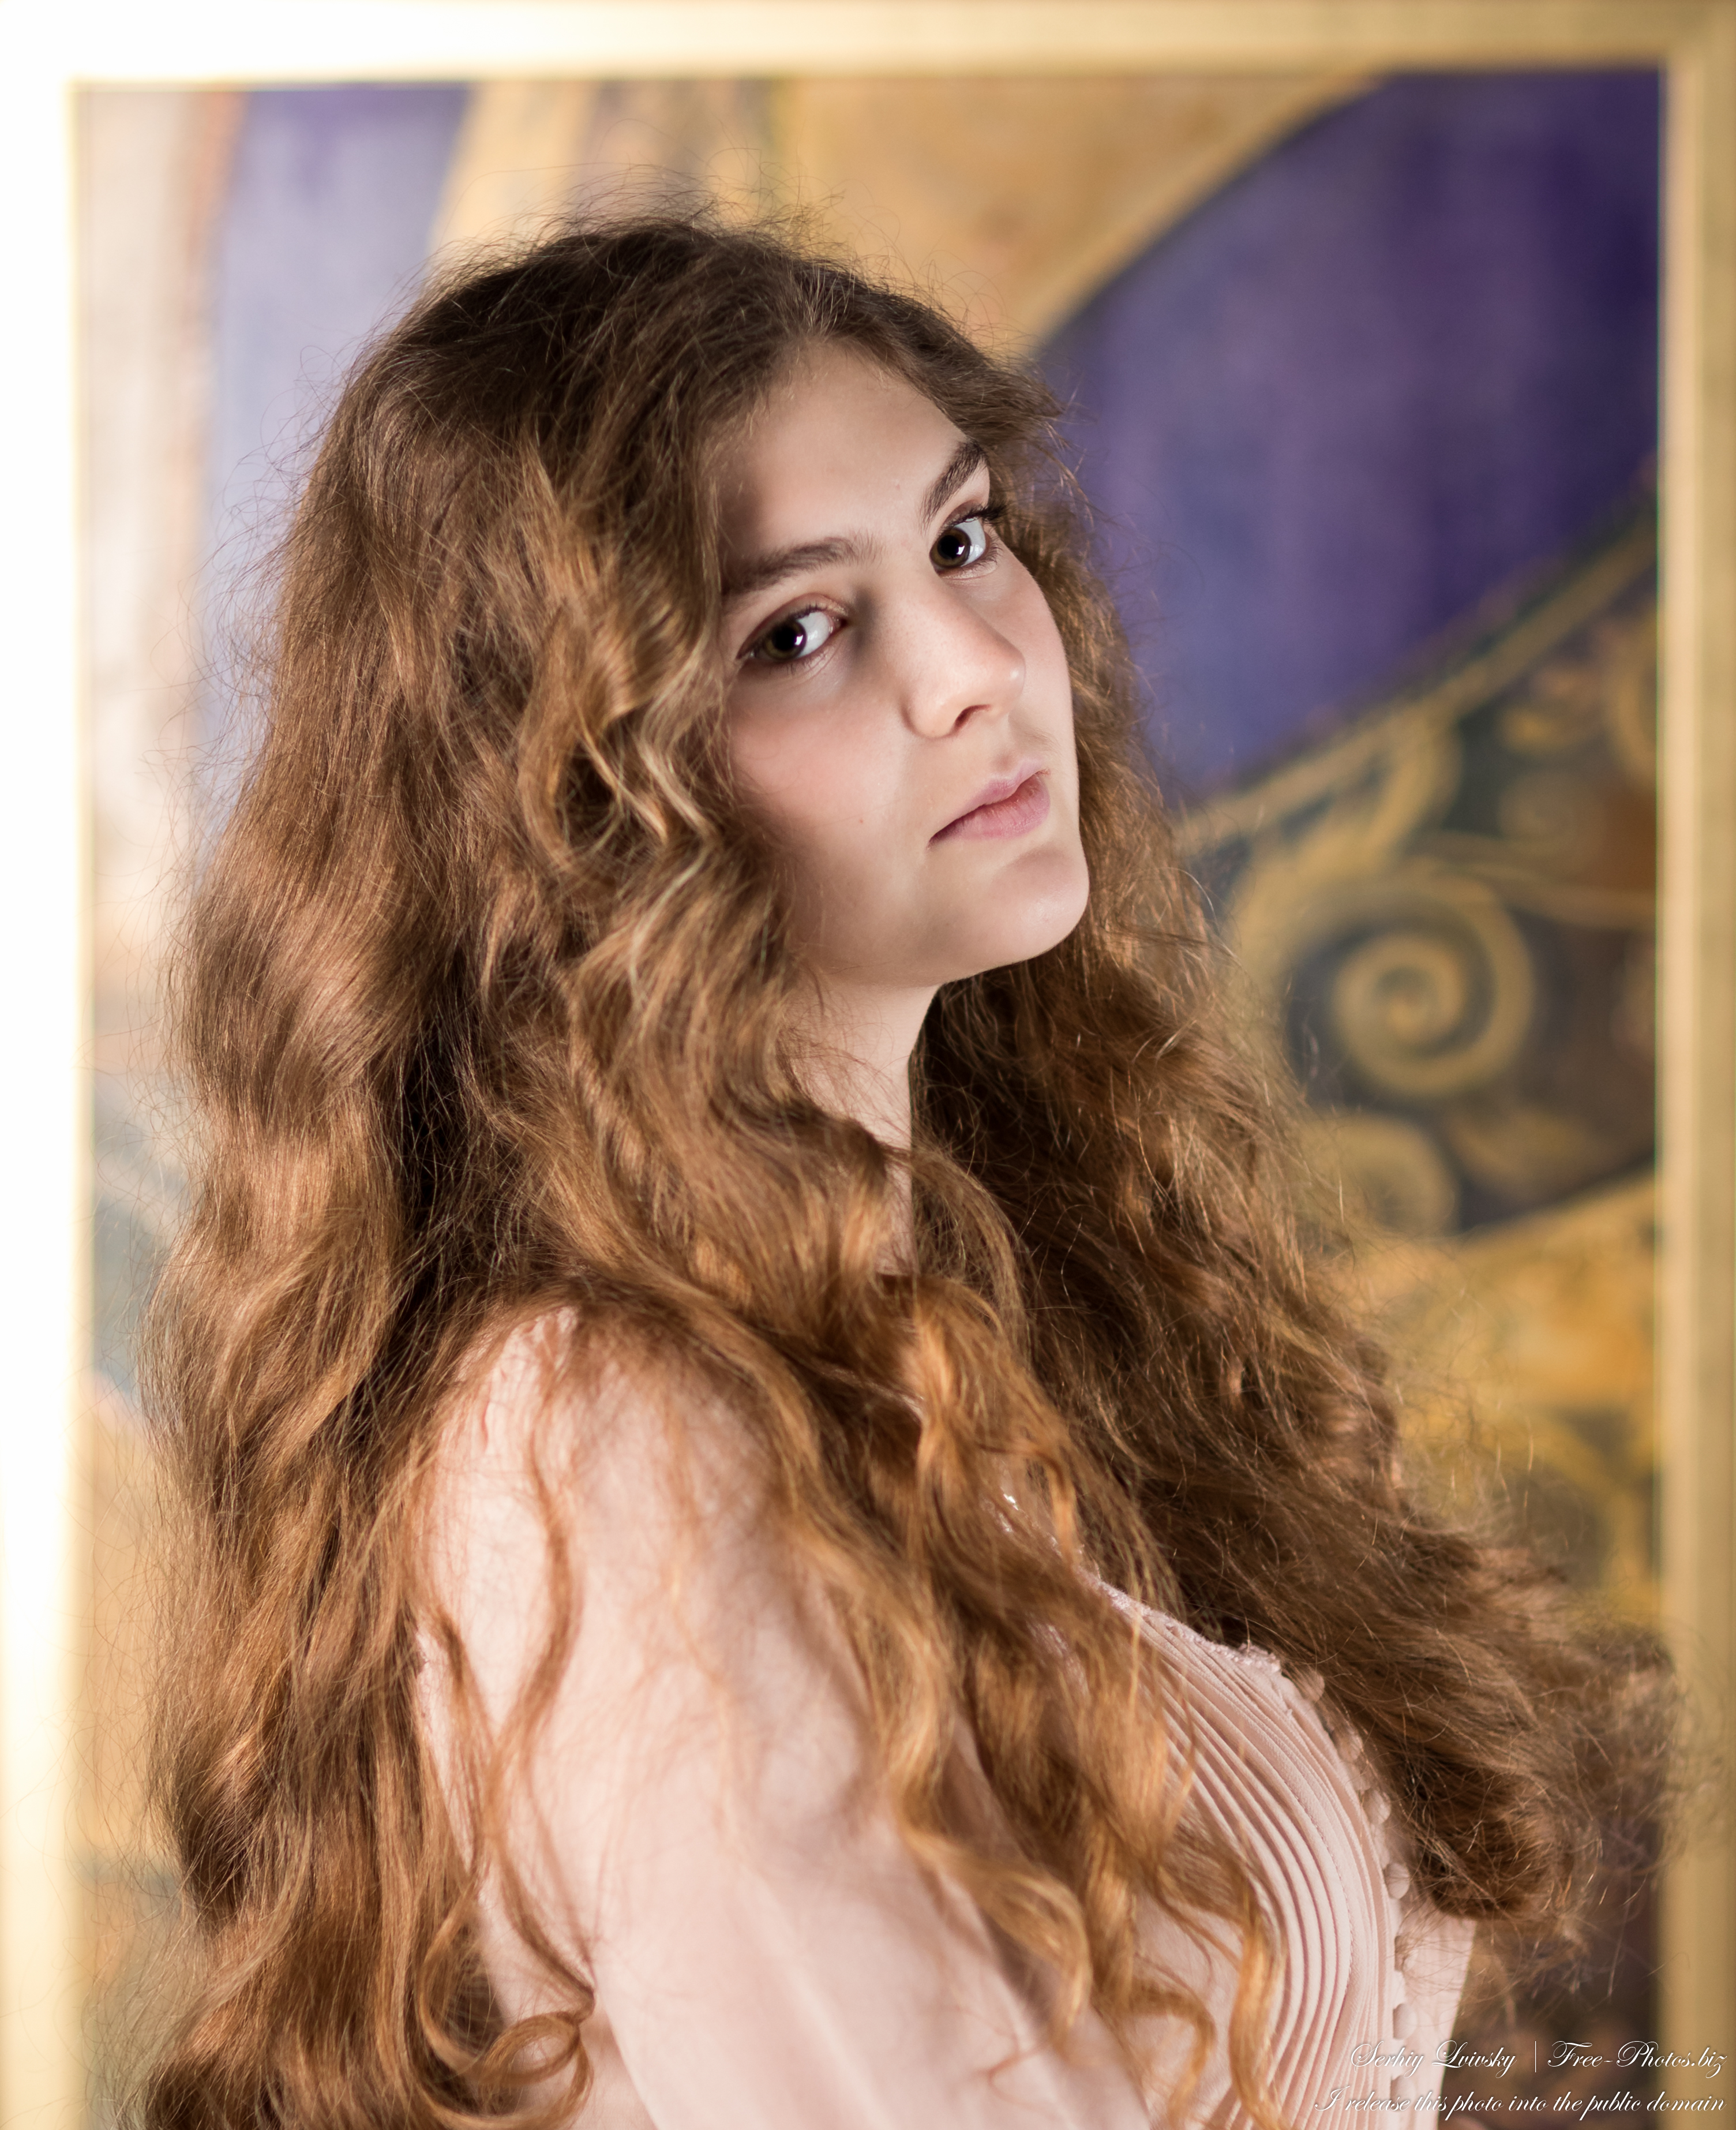 kornelia_a_15-year-old_girl_with_curly_hair_photographed_in_march_2023_by_serhiy_lvivsky_12